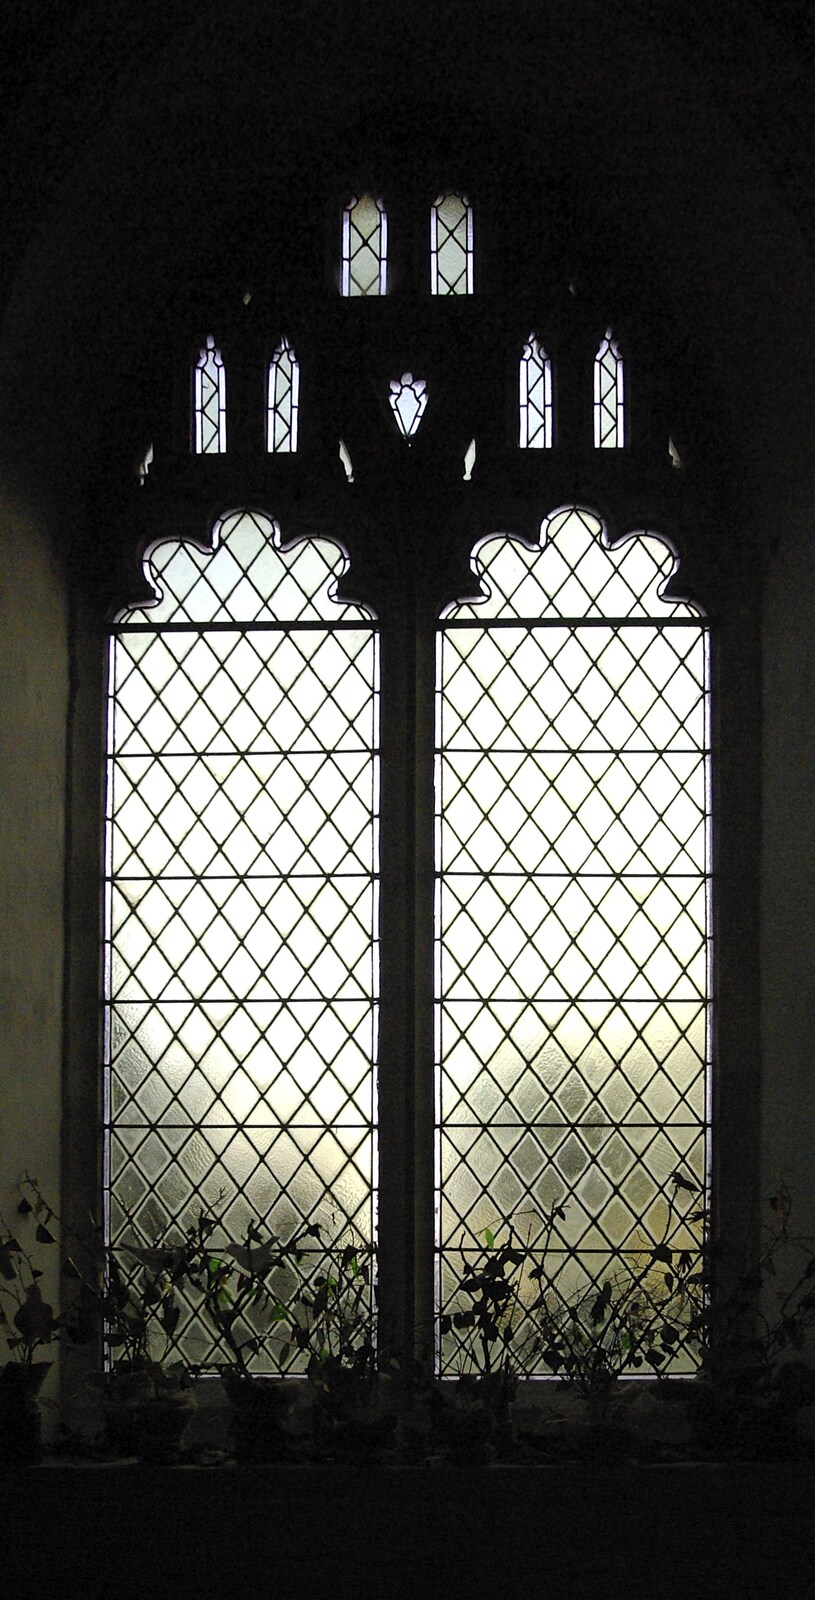 A plain leaded window from Organ Practice, Swiss Fondue and Curry With Gov, Thorndon, Cambridge and Diss - 27th January 2008